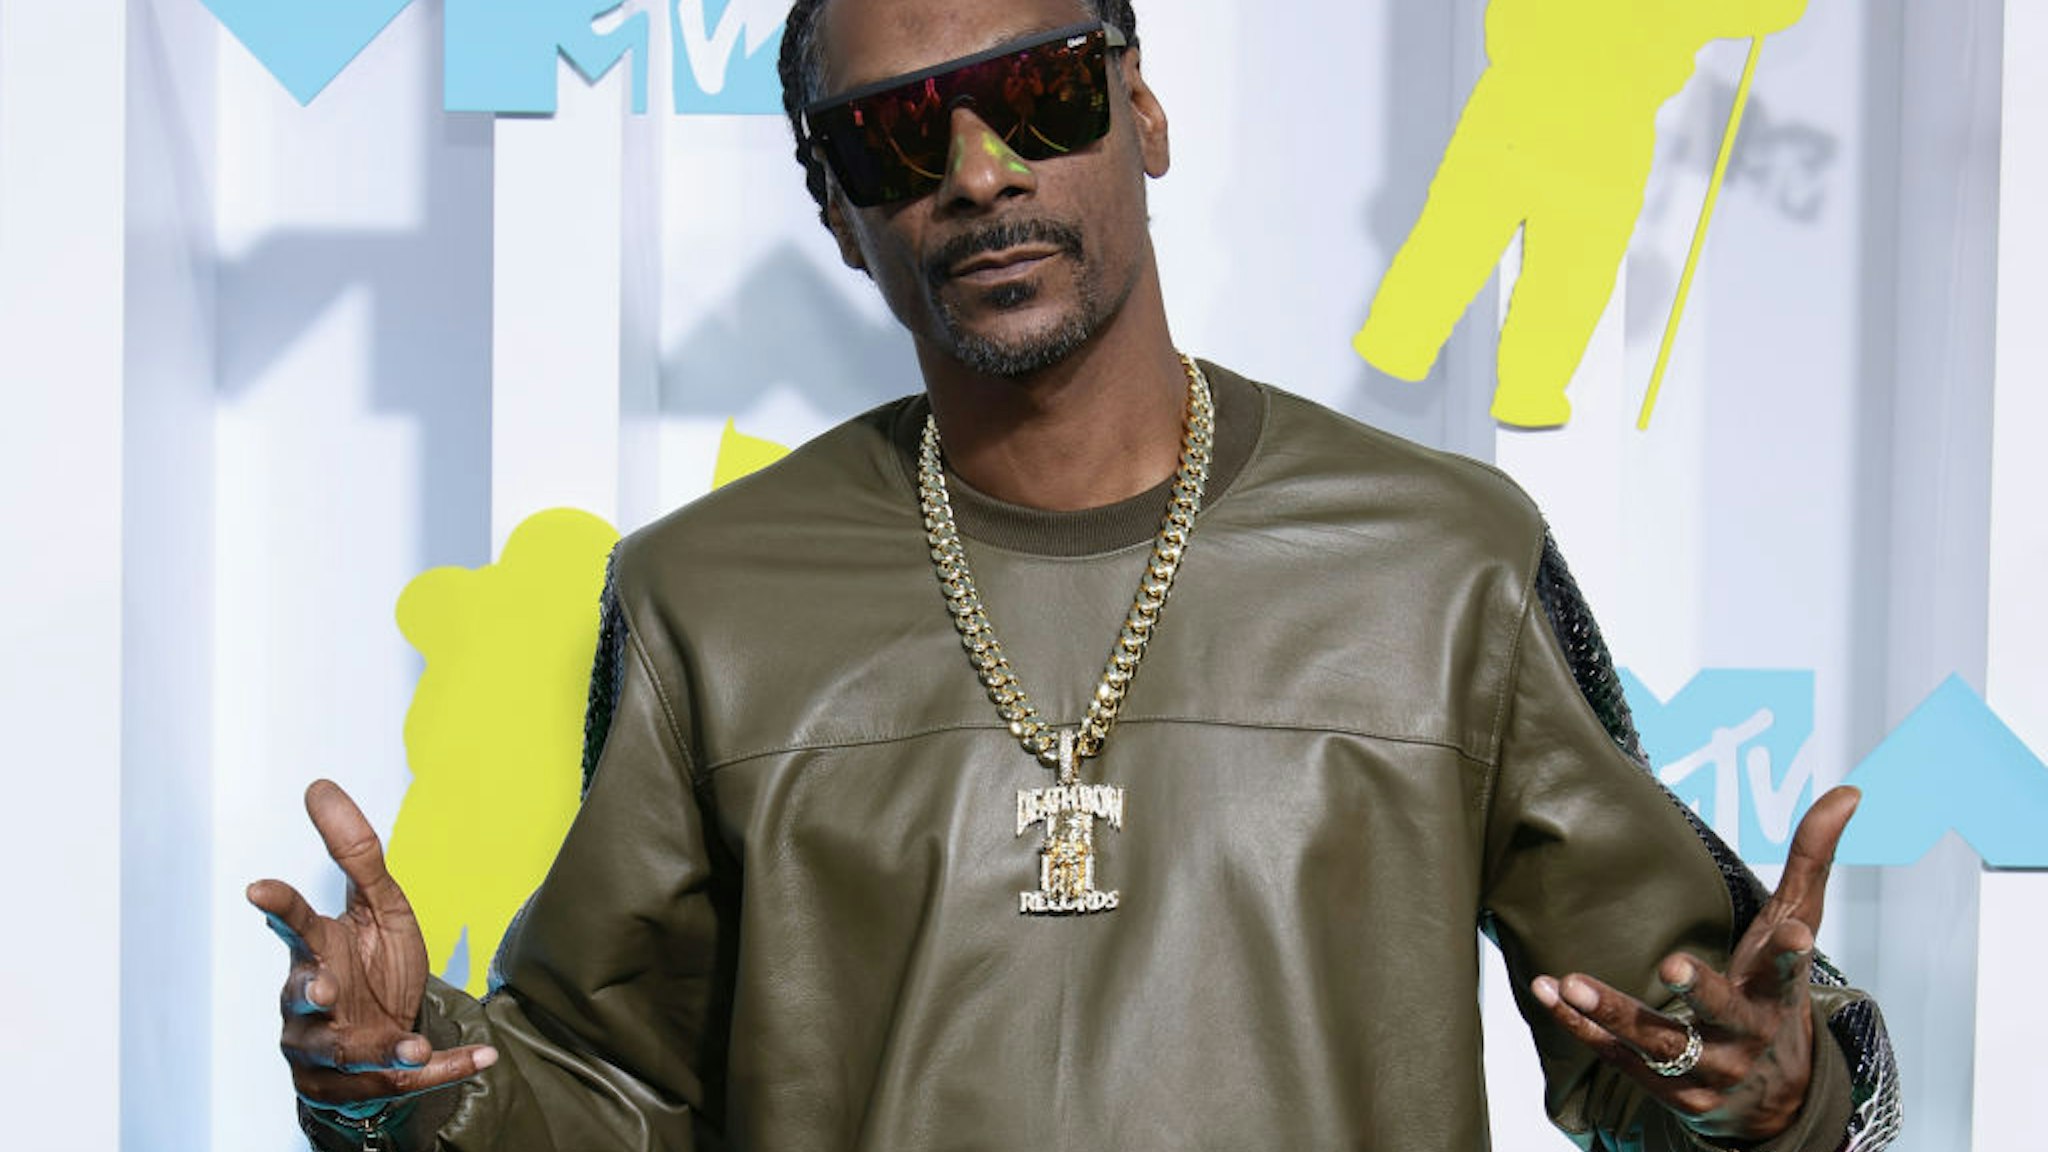 NEWARK, NEW JERSEY - AUGUST 28:Snoop Dogg attends the 2022 MTV VMAs at Prudential Center on August 28, 2022 in Newark, New Jersey. attends the 2022 MTV VMAs at Prudential Center on August 28, 2022 in Newark, New Jersey. (Photo by Dimitrios Kambouris/Getty Images for MTV/Paramount Global)